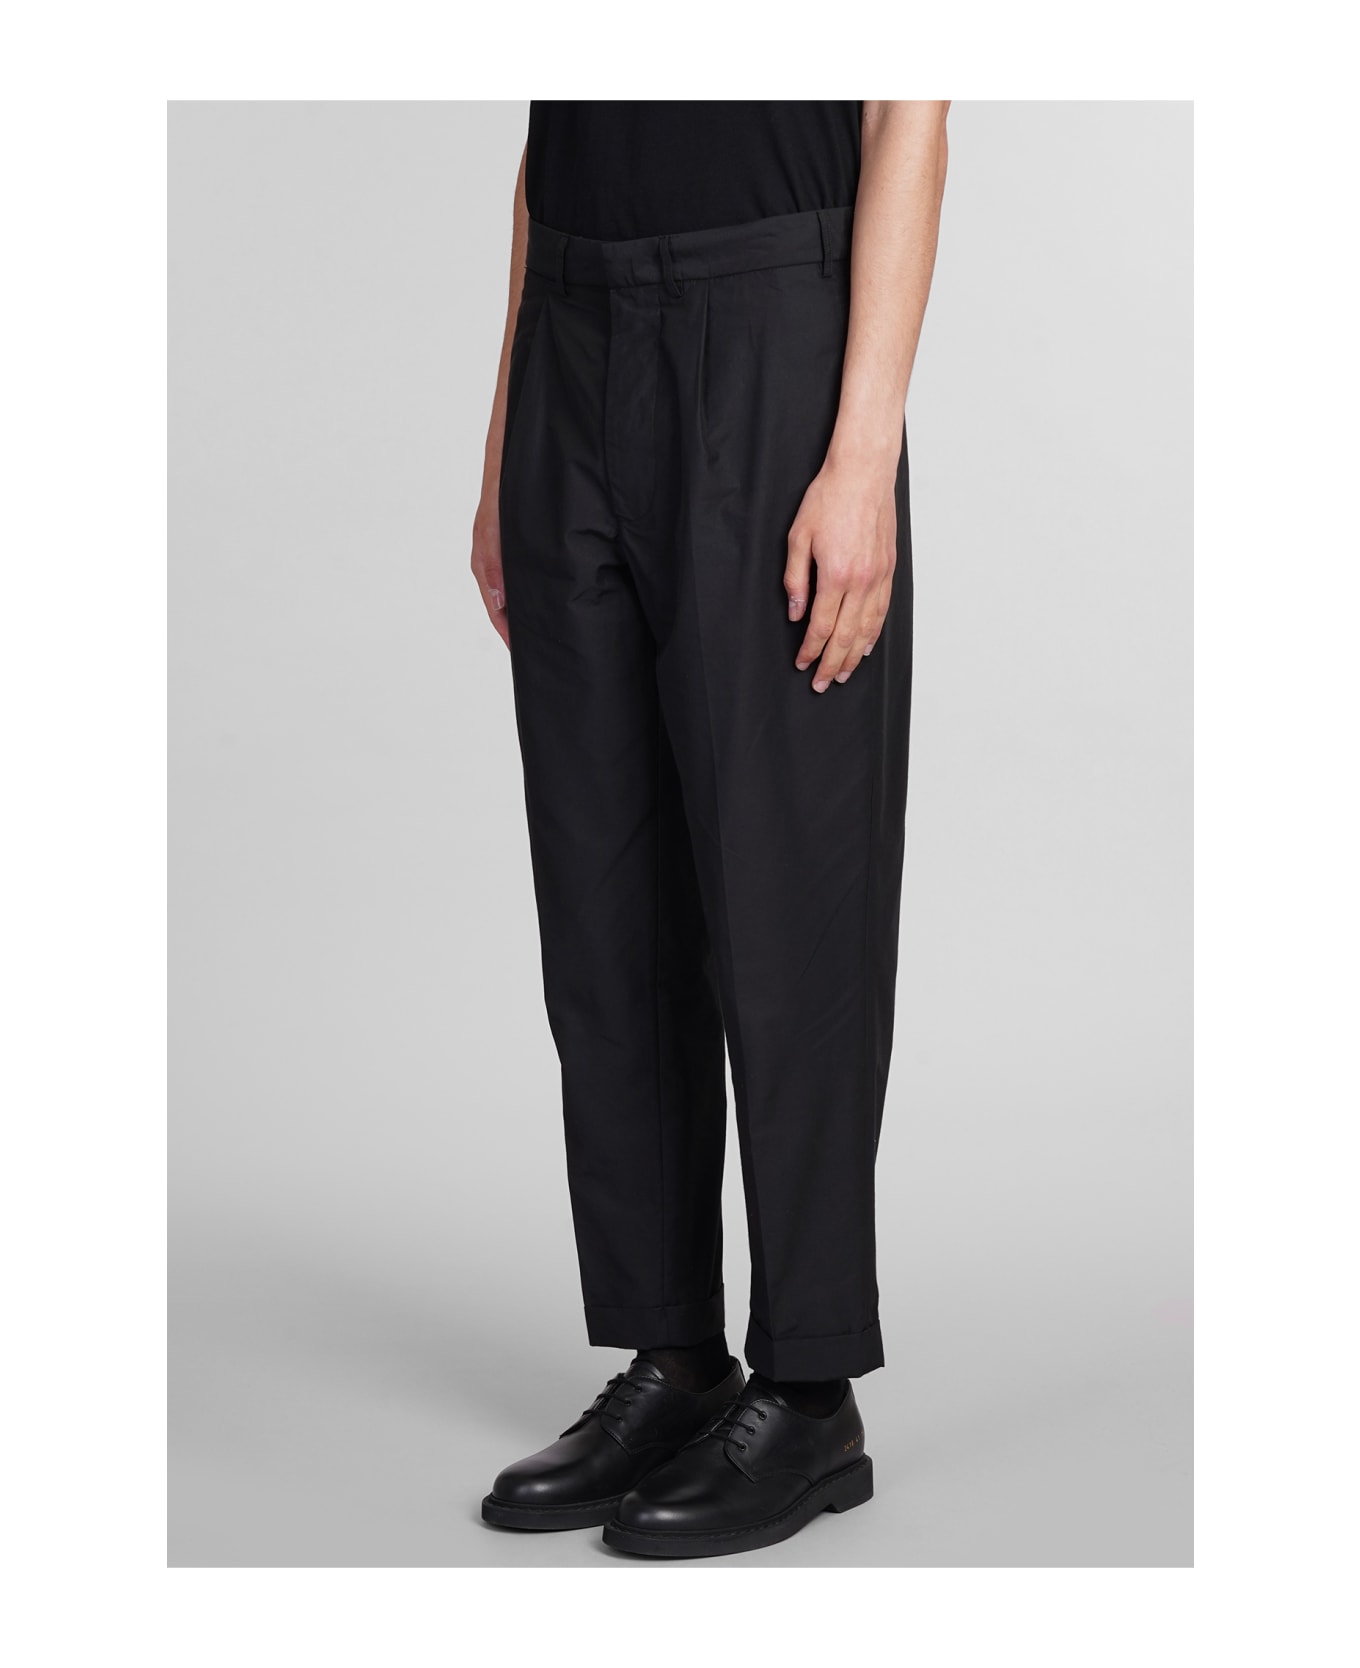 Mauro Grifoni Pants In Black Cotton - black ボトムス